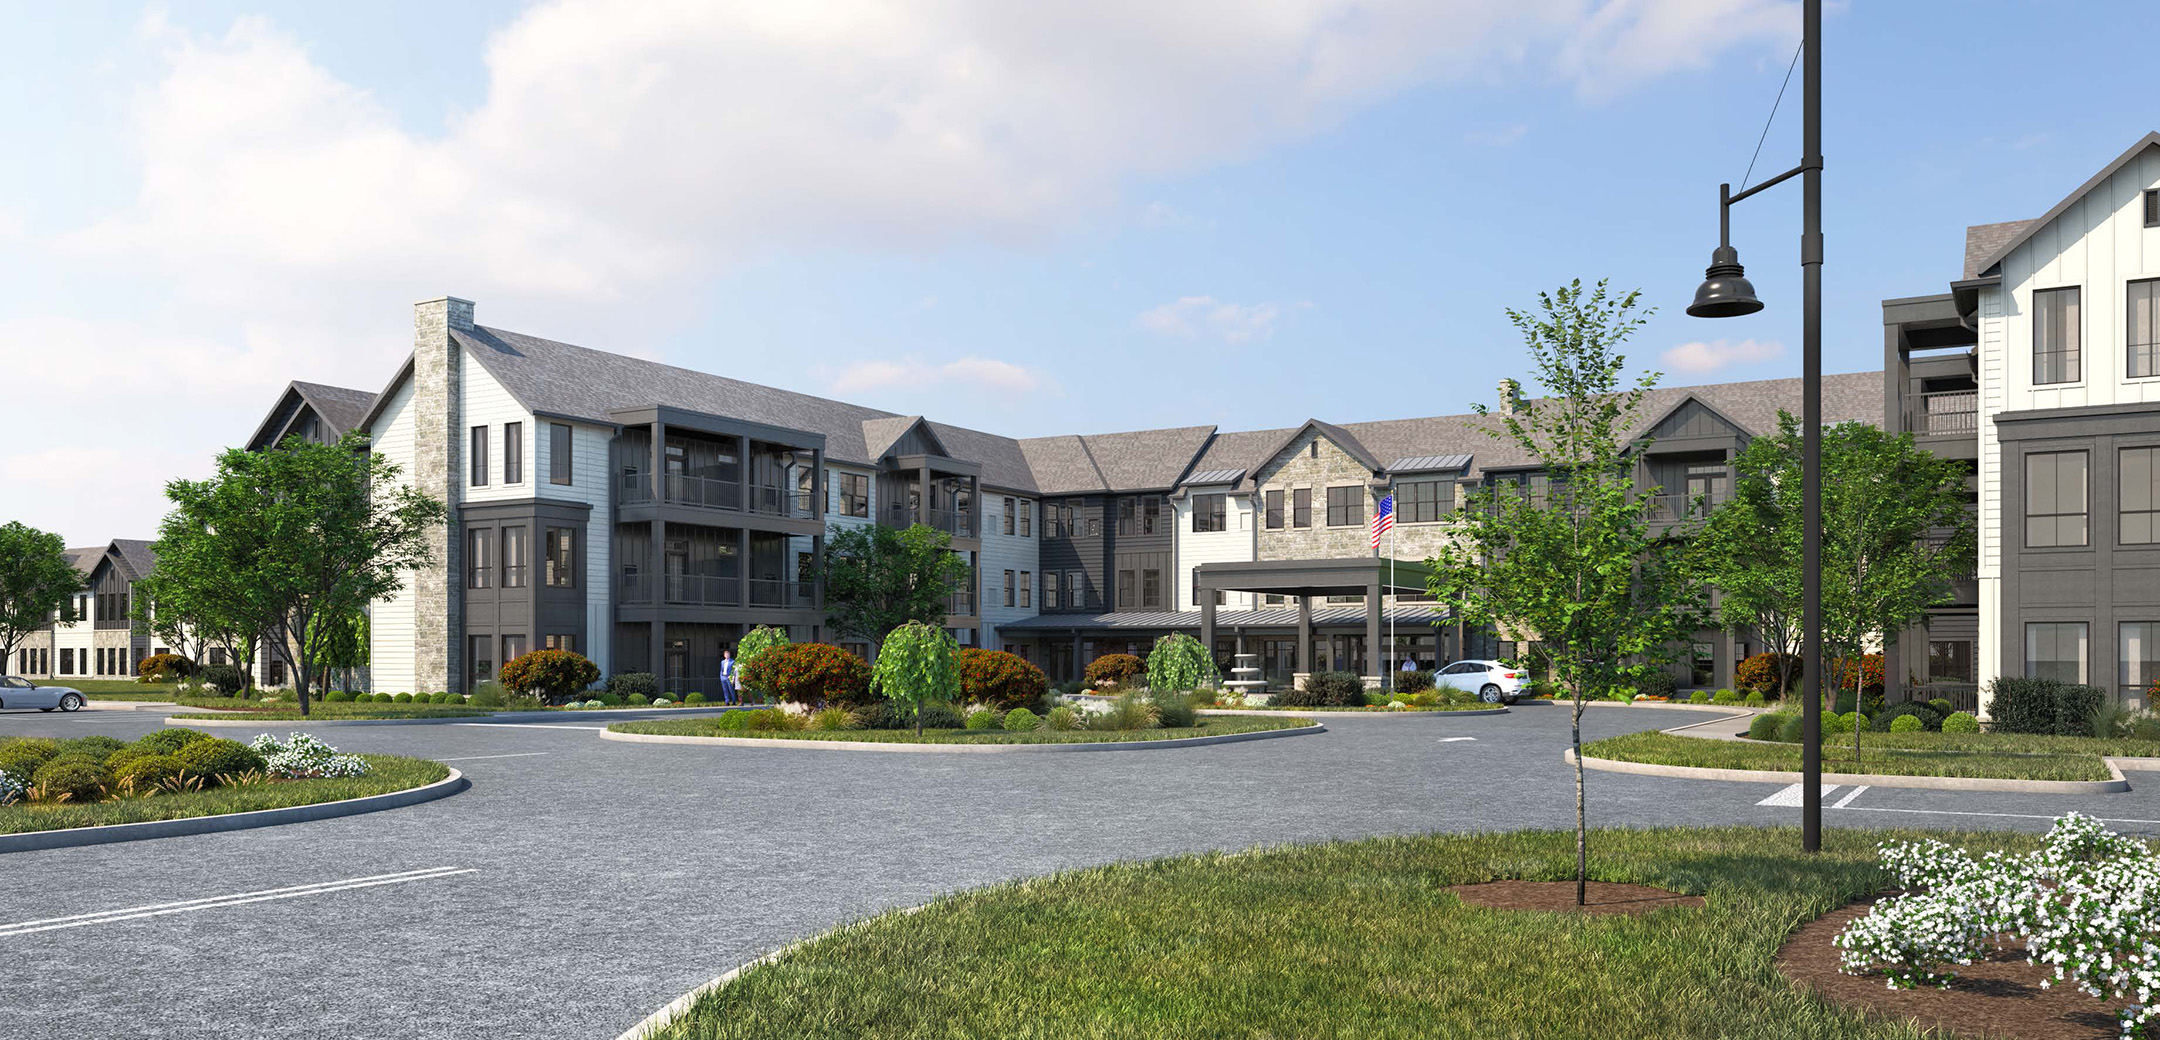 A rendering of Brightview Holmdel Senior Living featuring brown stone and wood exterior and a landscaped front yard.